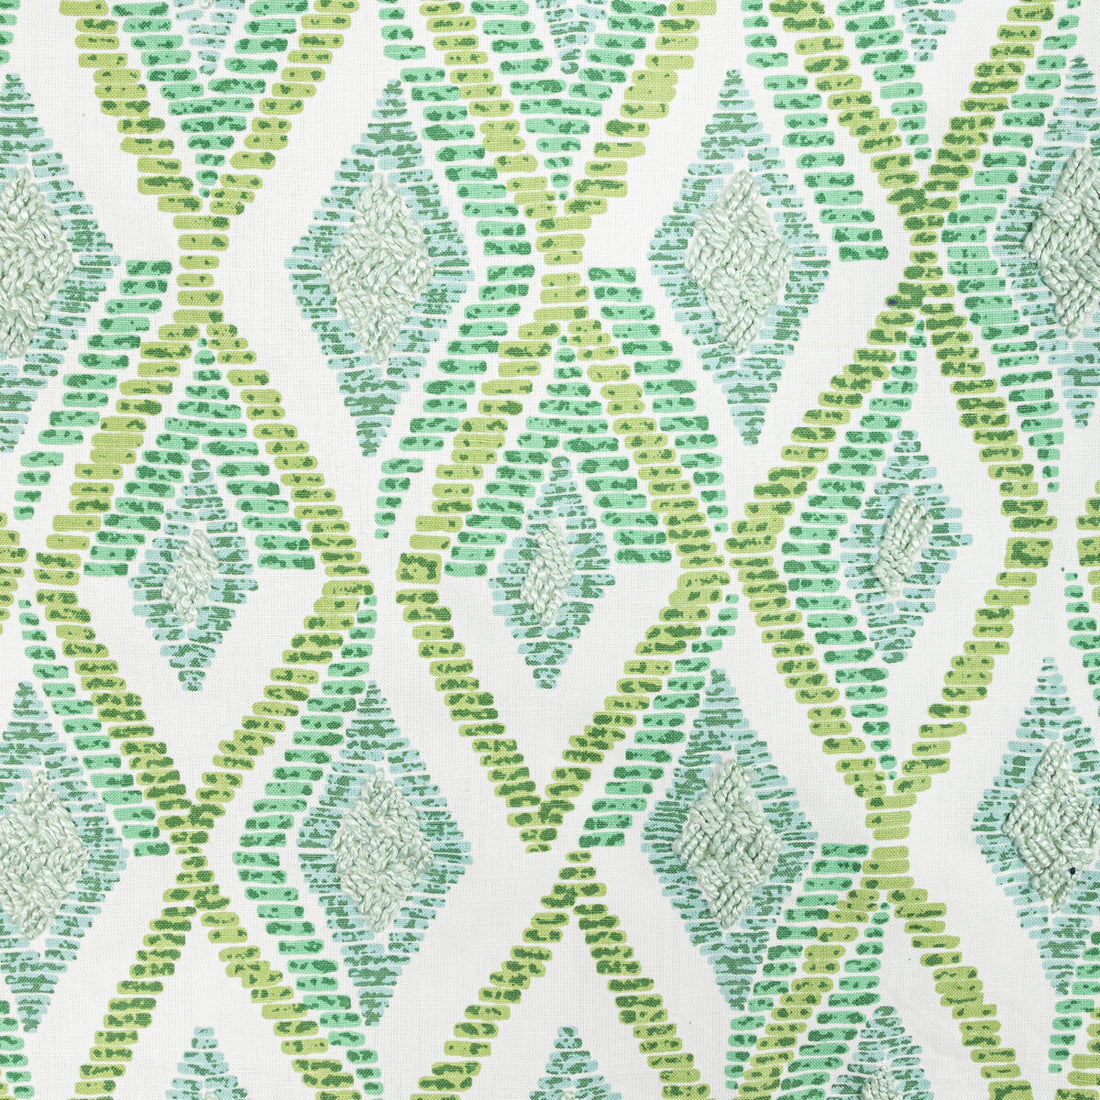 Antiparos fabric in mojito color - pattern ANTIPAROS.353.0 - by Kravet Design in the Nadia Watts Gem collection